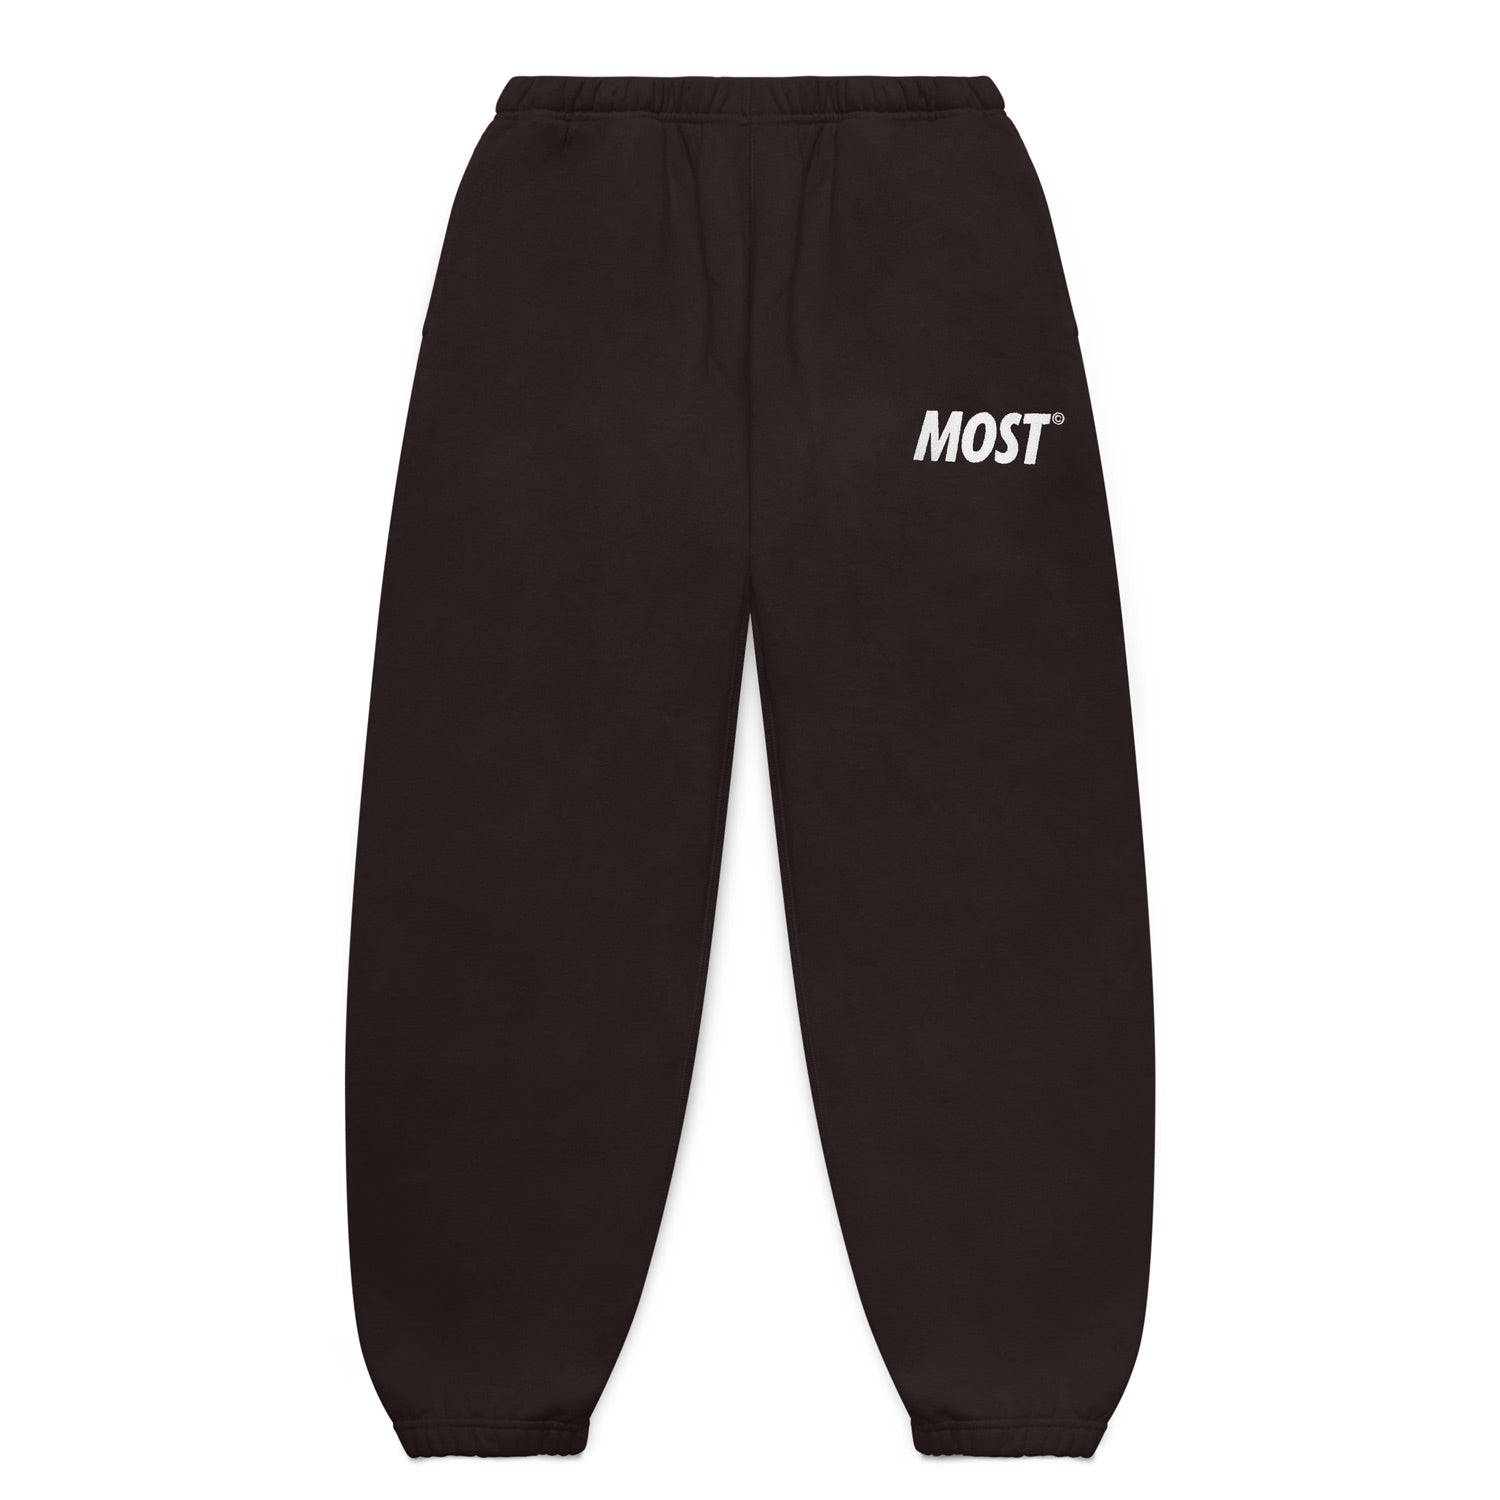 Logo© Smooth Weight Sweatpant - Cocoa